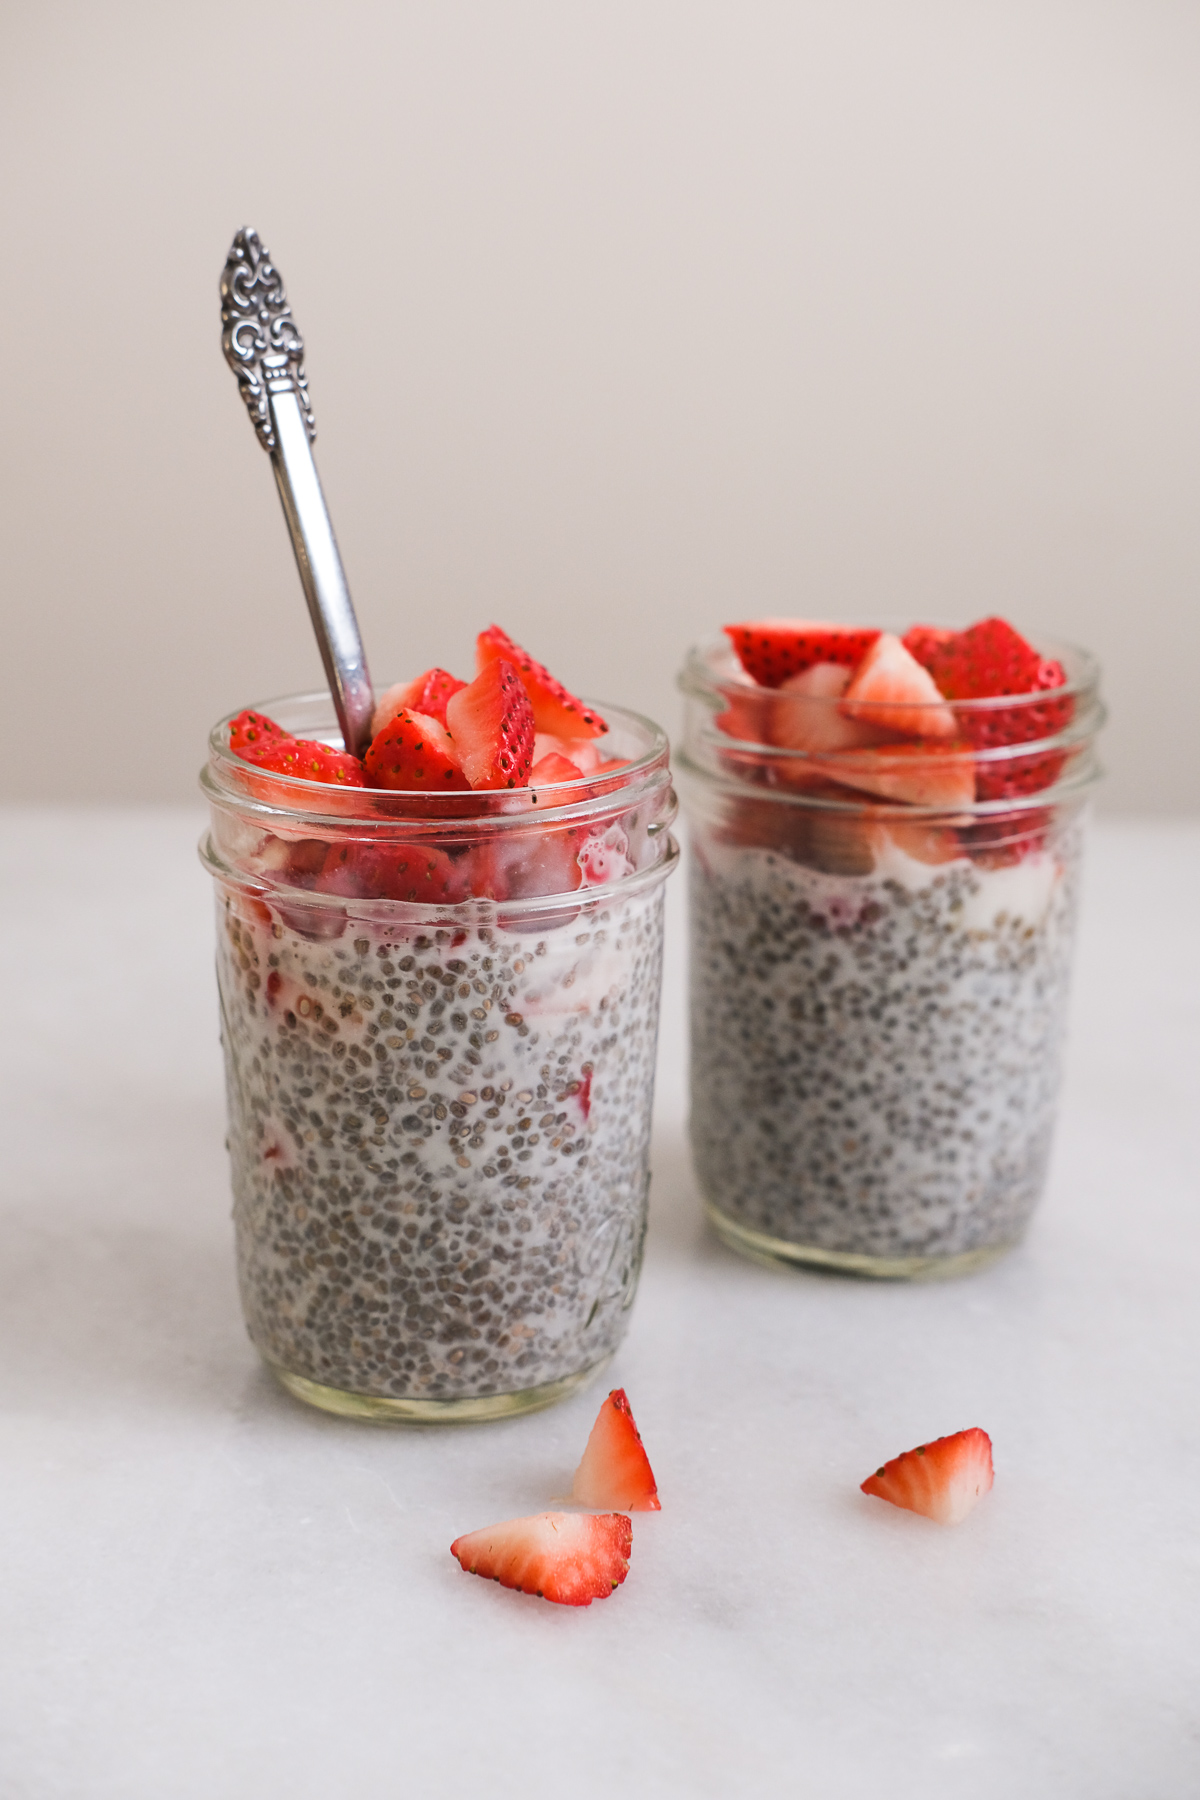 two jars of chia seed pudding with fresh strawberries